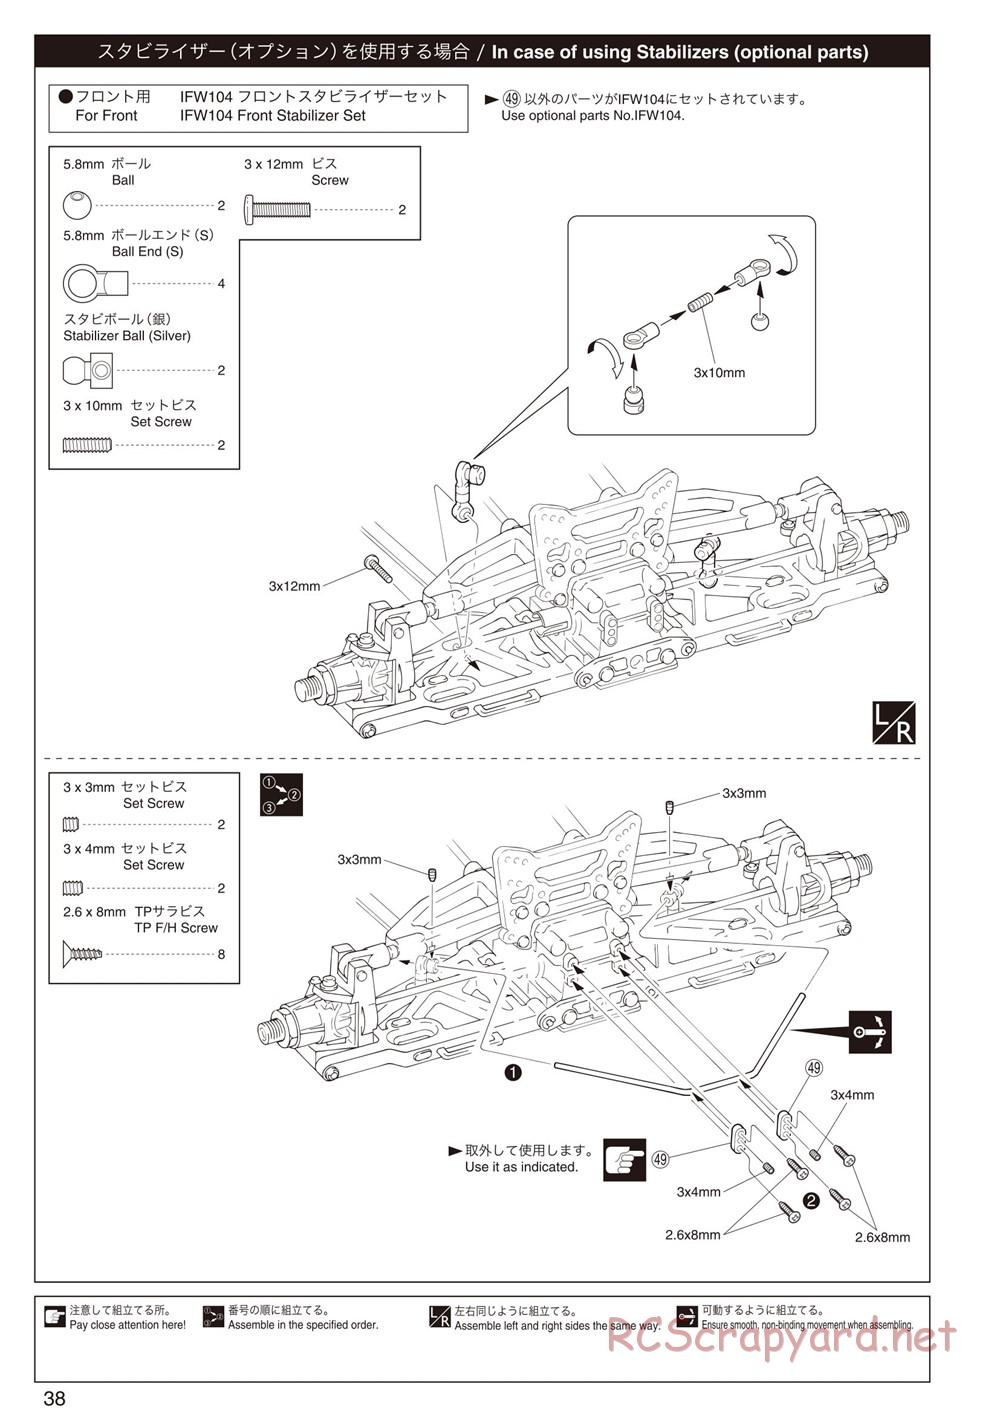 Kyosho - Inferno GT2 - Manual - Page 38